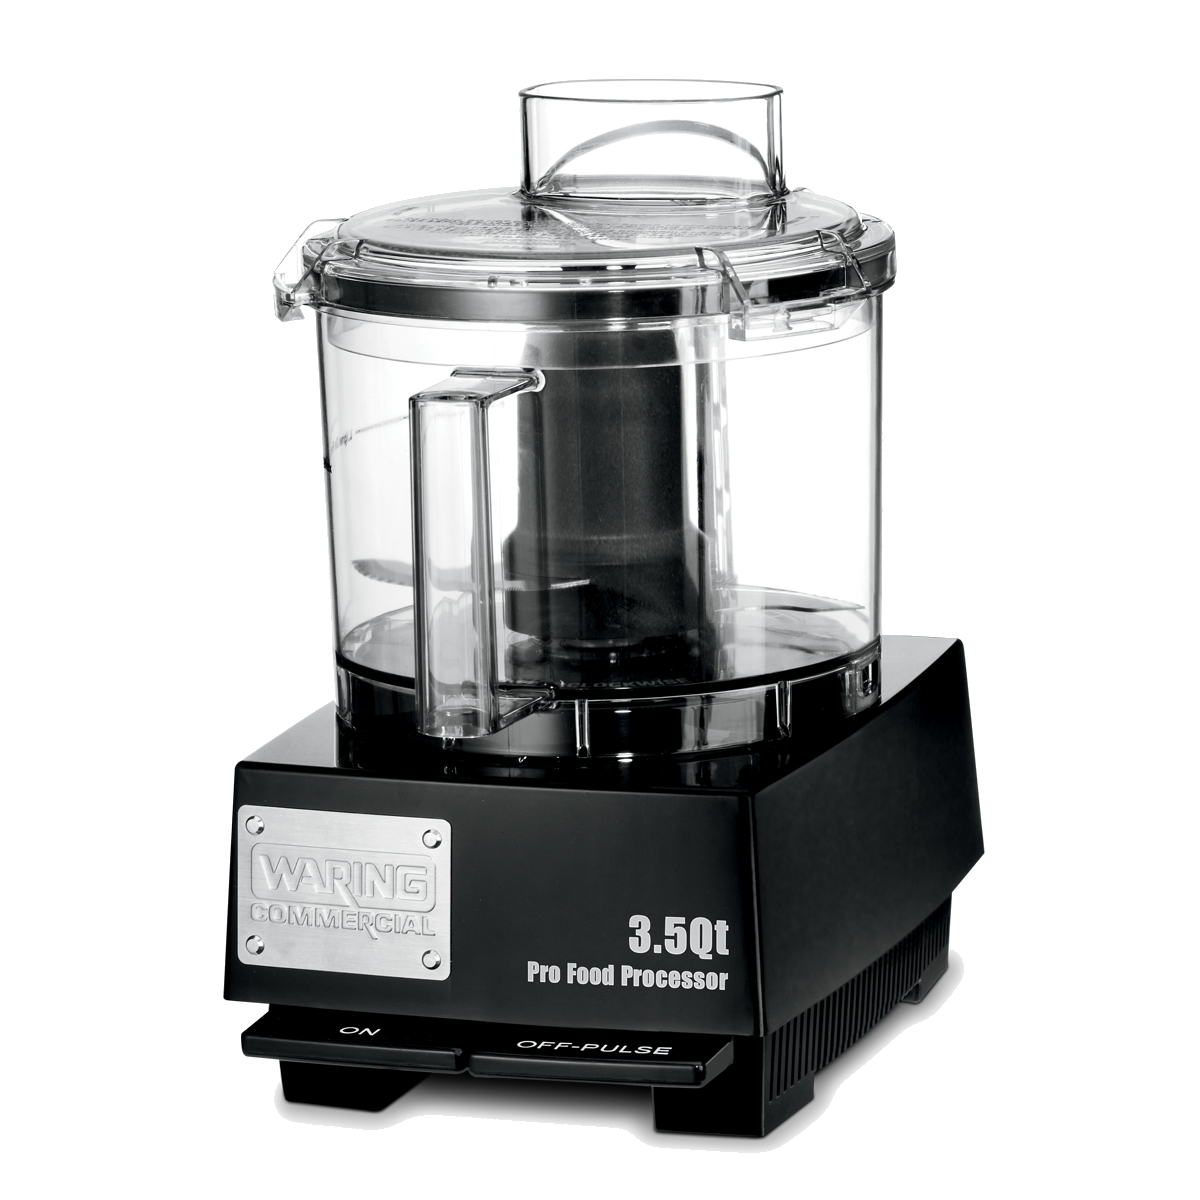 https://www.waringcommercialproducts.com/files/products/wfp14sw-waring-food-processor-main.png